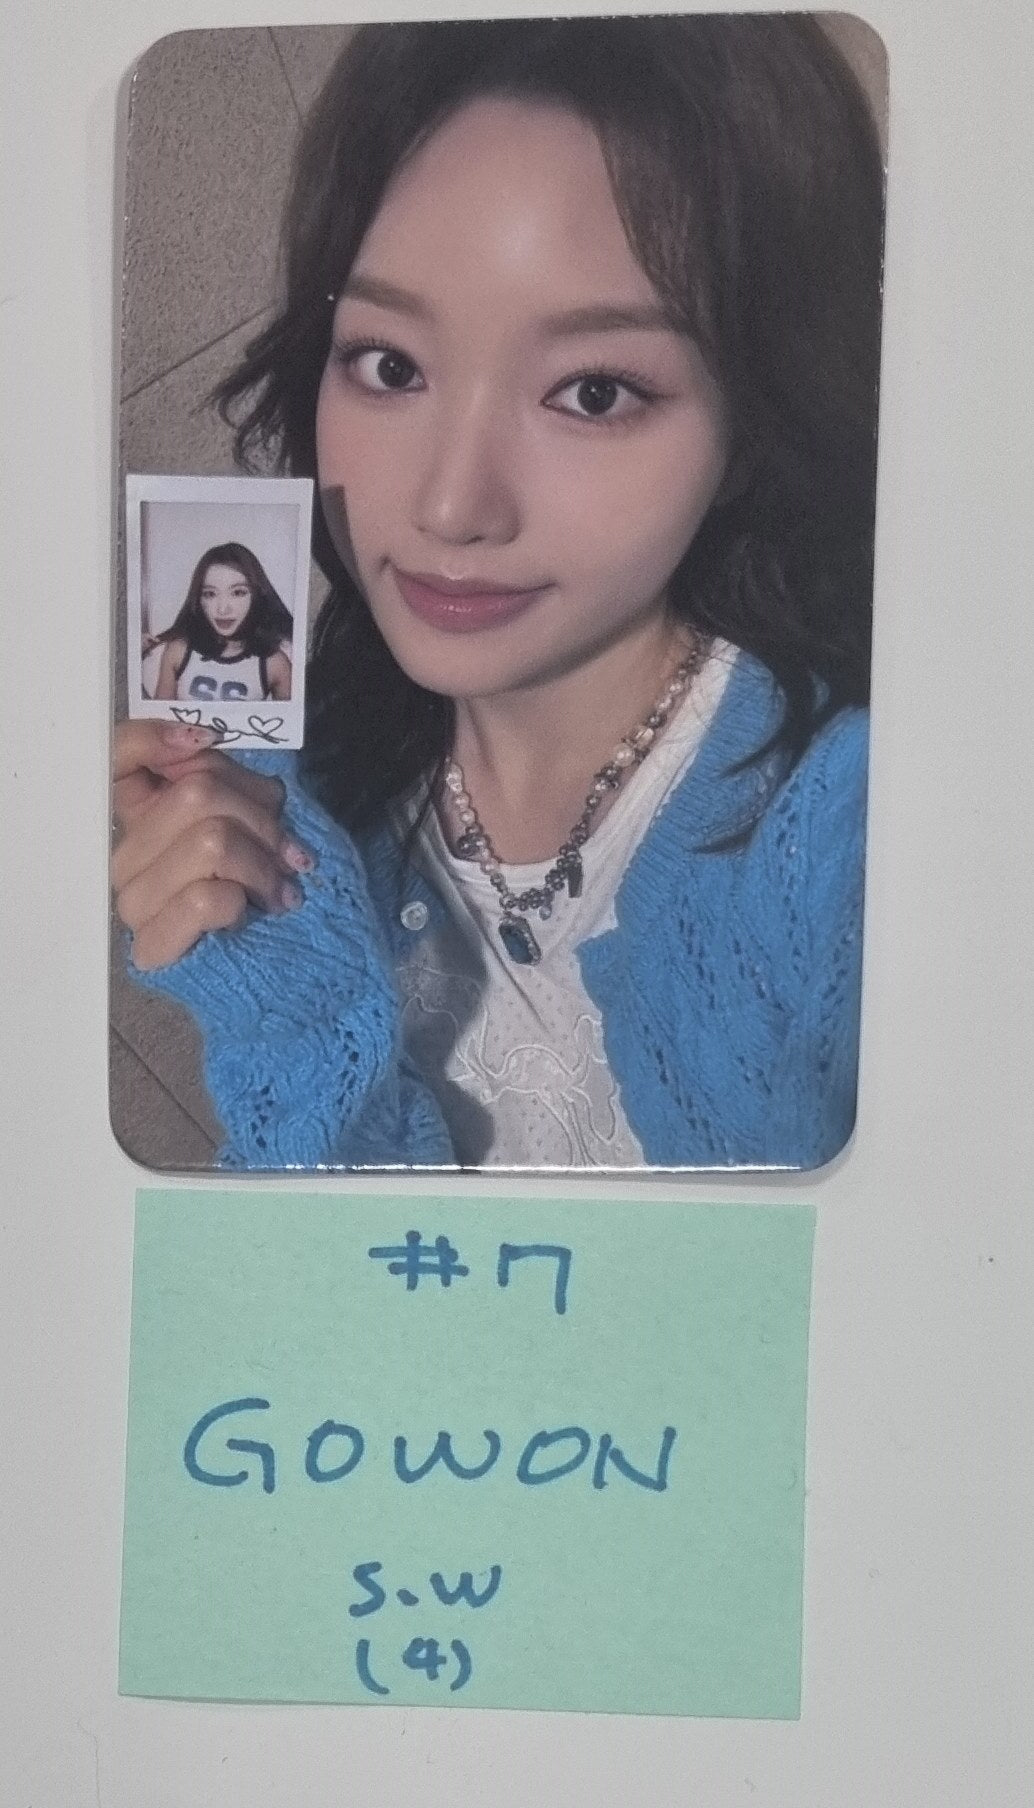 Loossemble "One of a Kind" - Soundwave Fansign Event Photocard Round 3 [24.6.11]